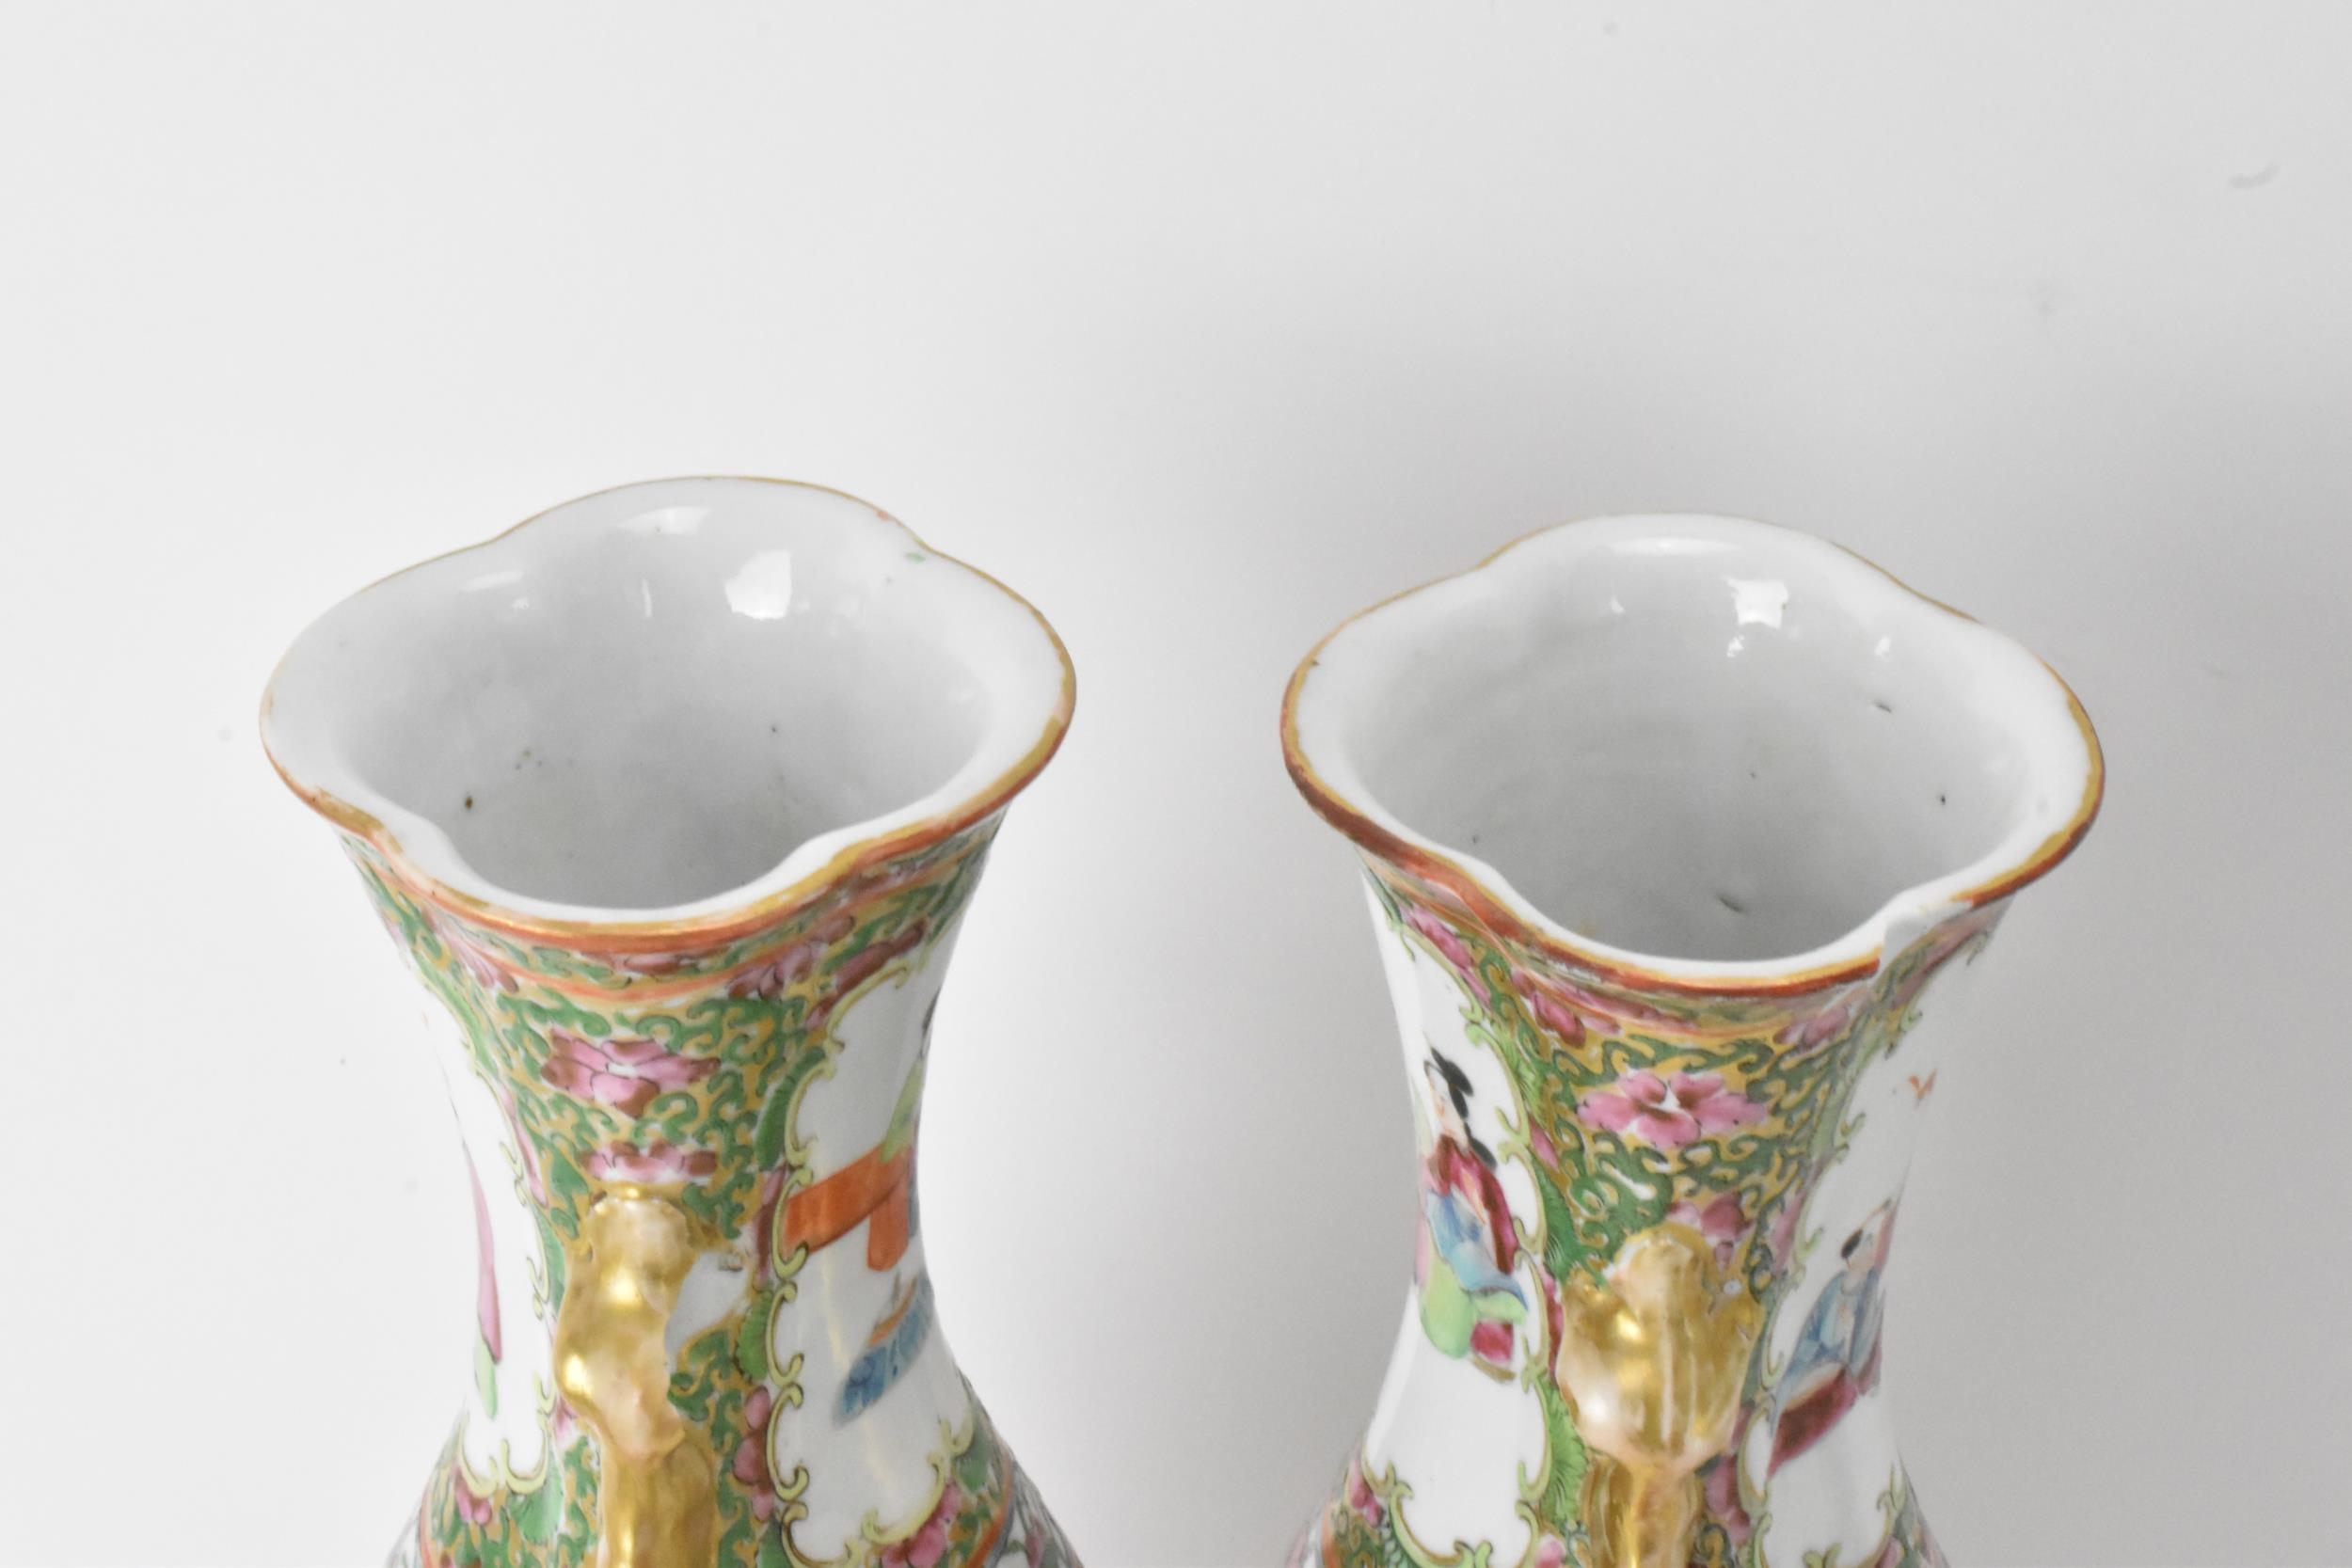 A pair of Chinese export Canton Famille Rose vases, Qing Dynasty, late 19th century, in polychrome - Image 5 of 6